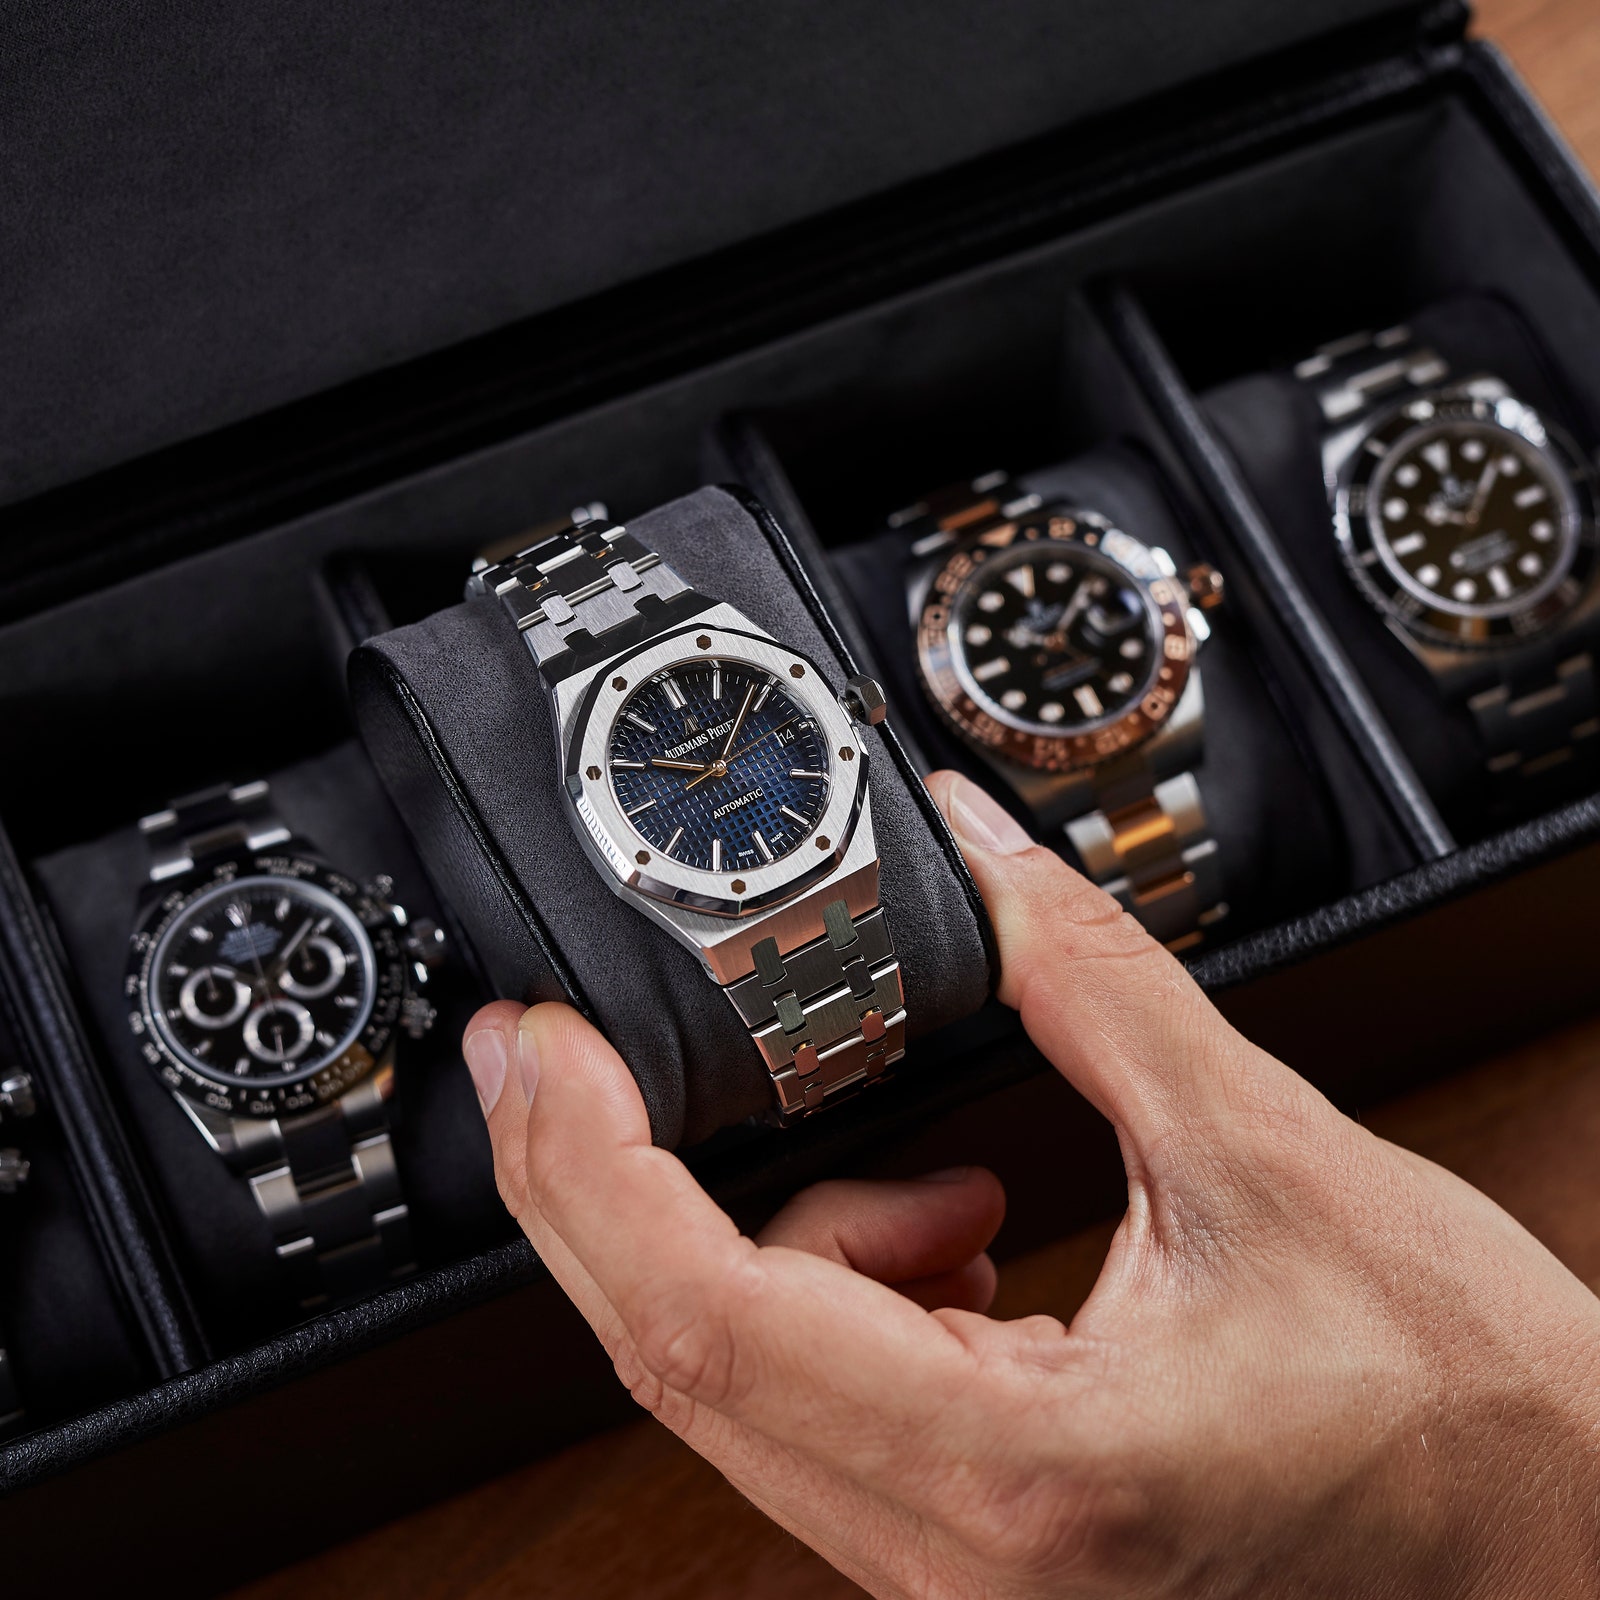 The hottest watches of 2023, according to the numbers